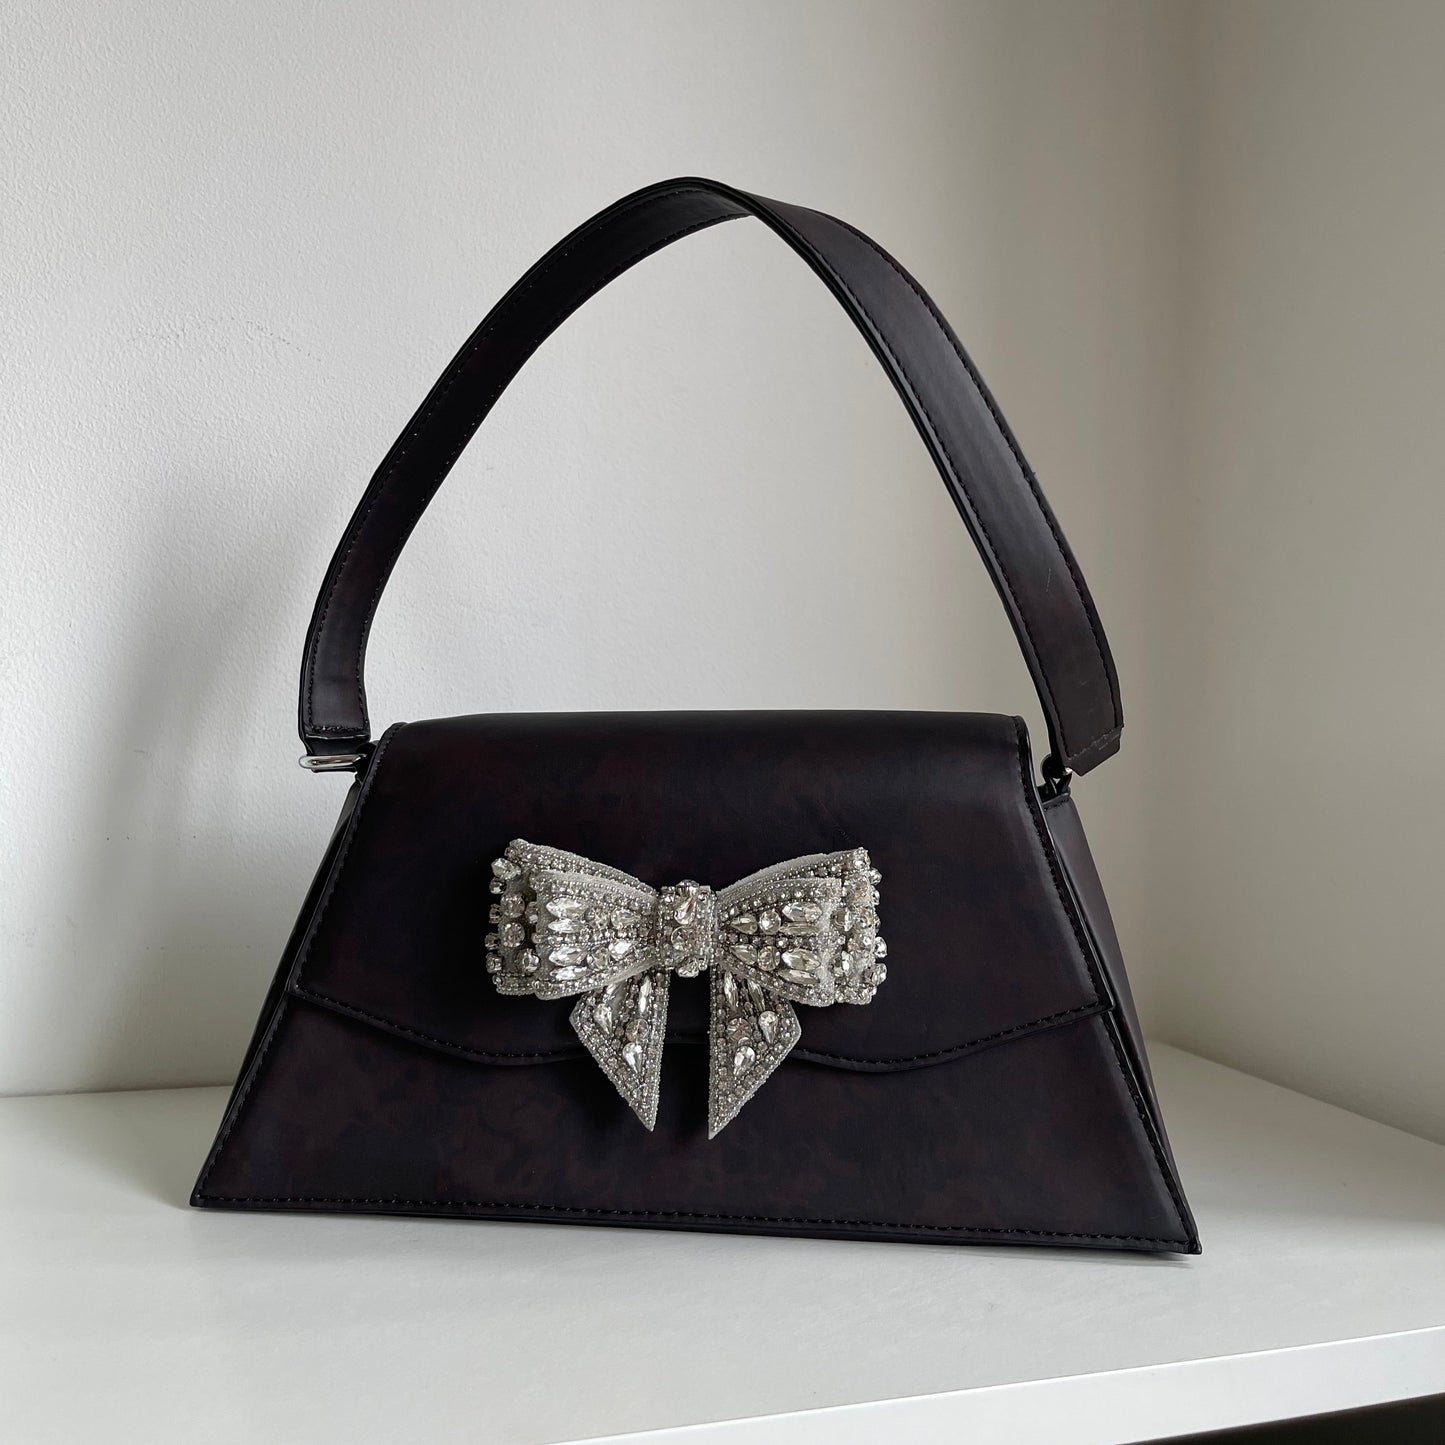 ‘The Lucid’ Jewelled Bag